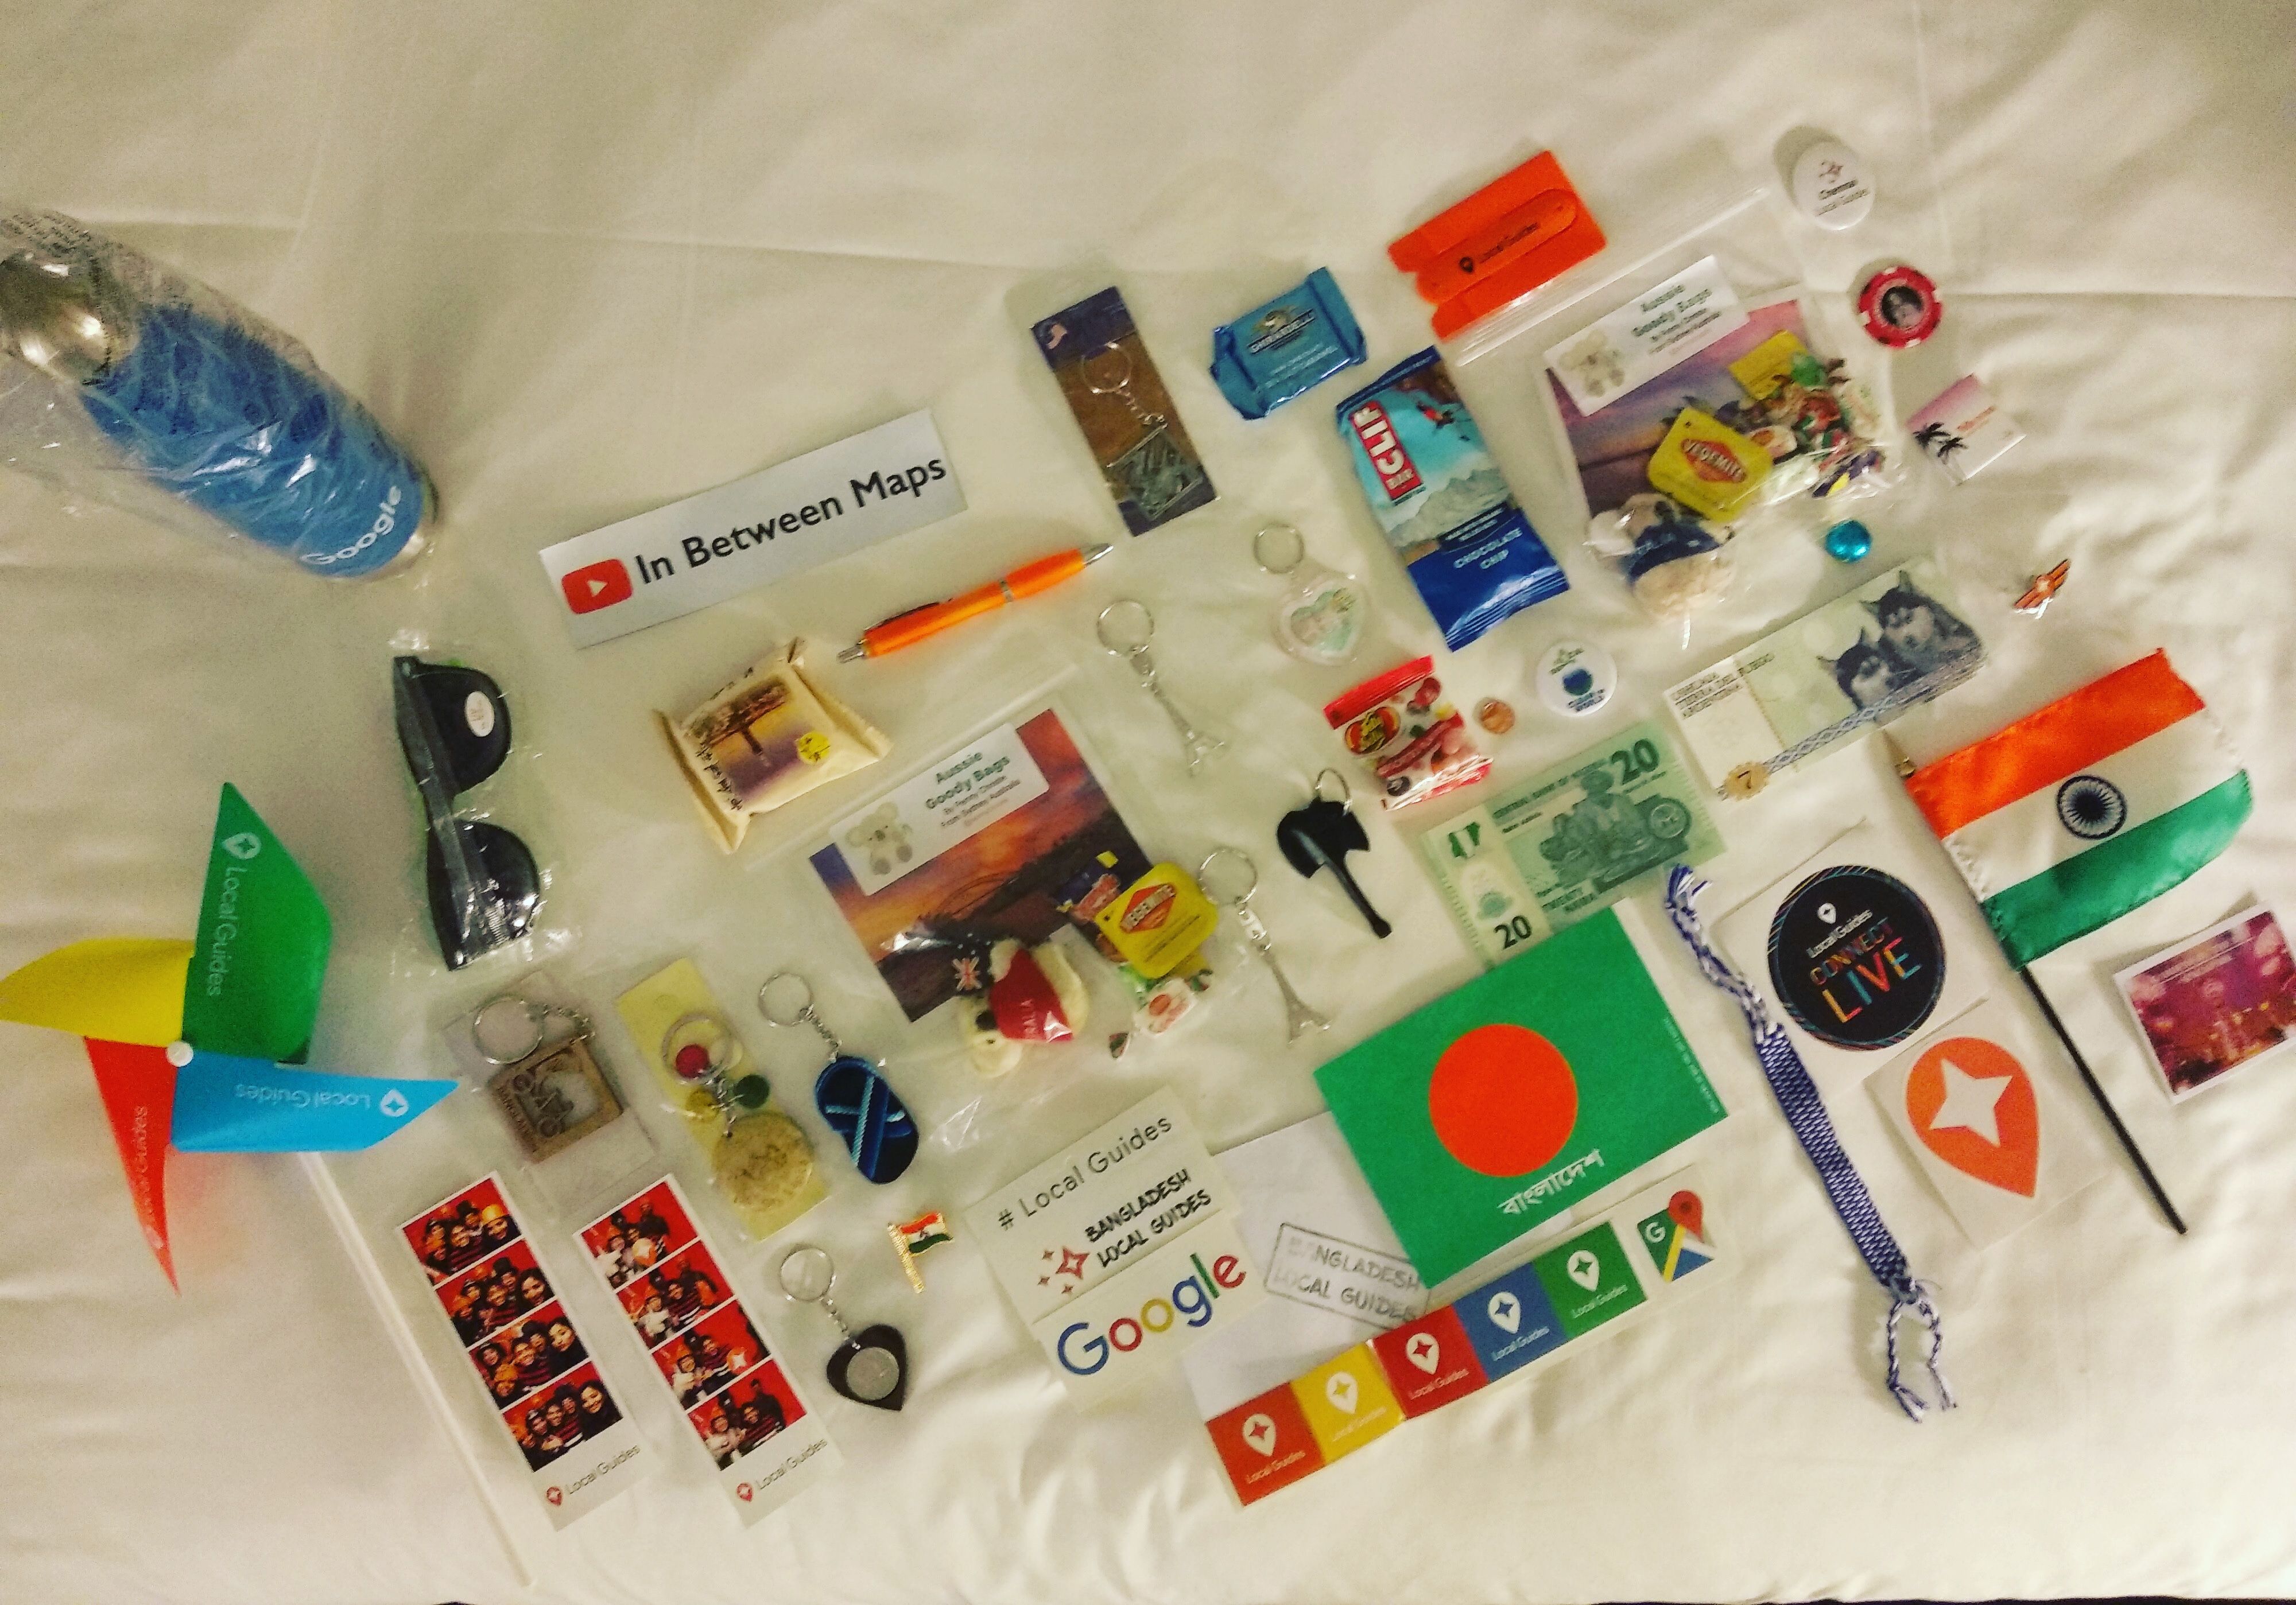 A collection of gifts which I got from wonderful Local Guides and Team at Connect Live 2018